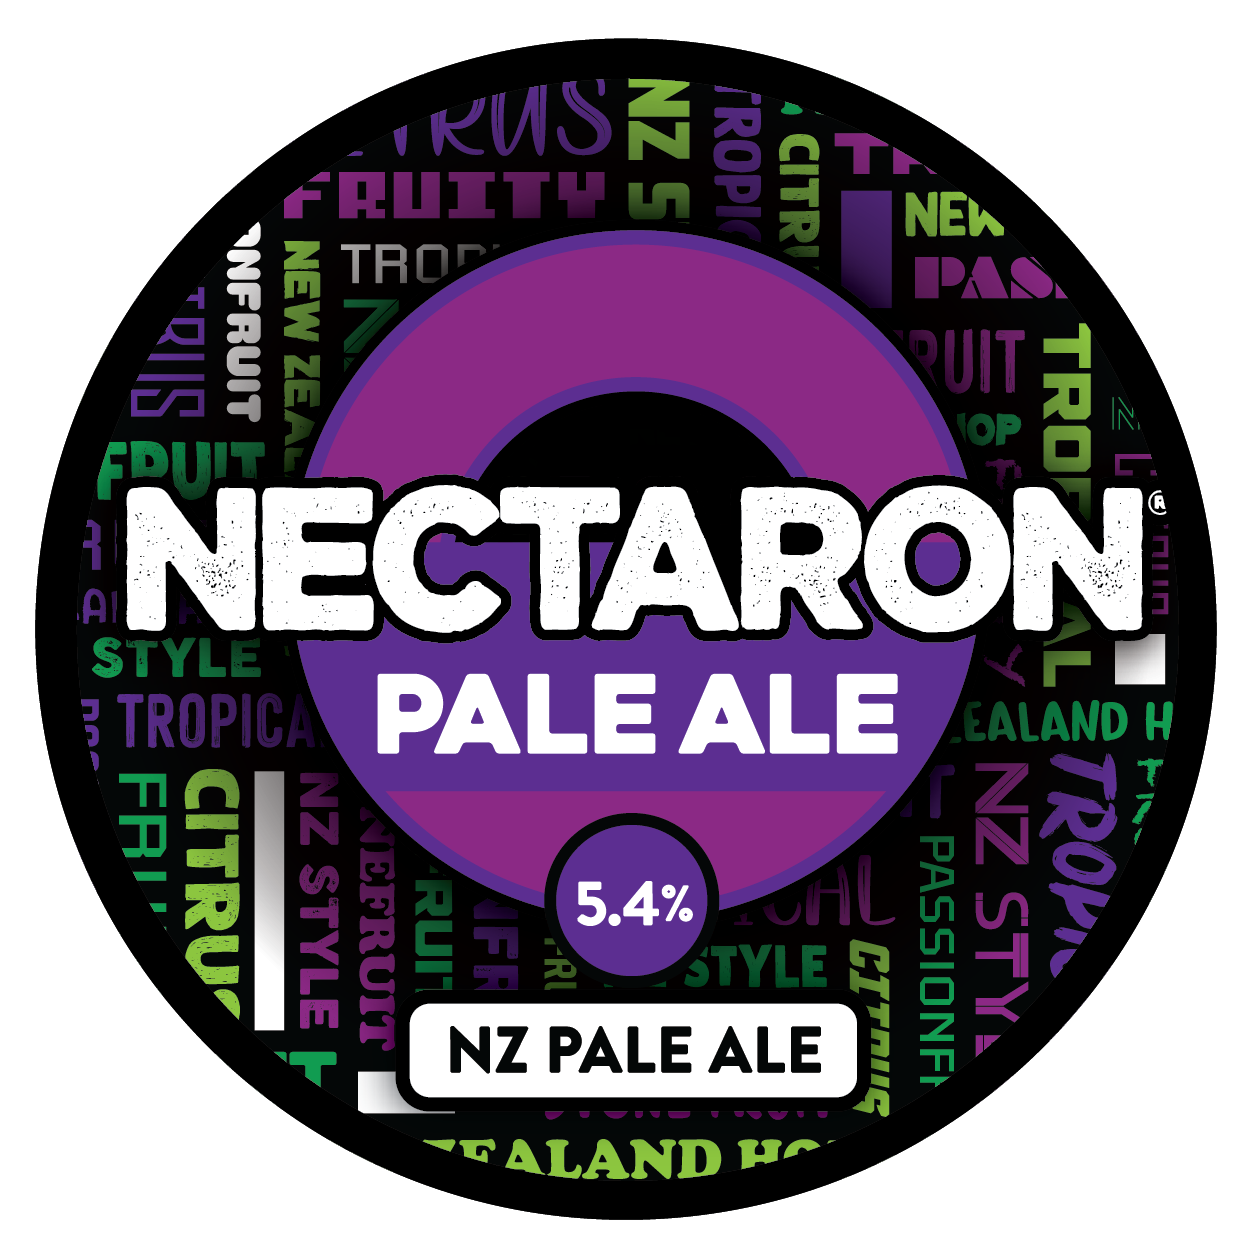 The tap badge for Sprig and Fern's Nectaron Pale Ale craft beer